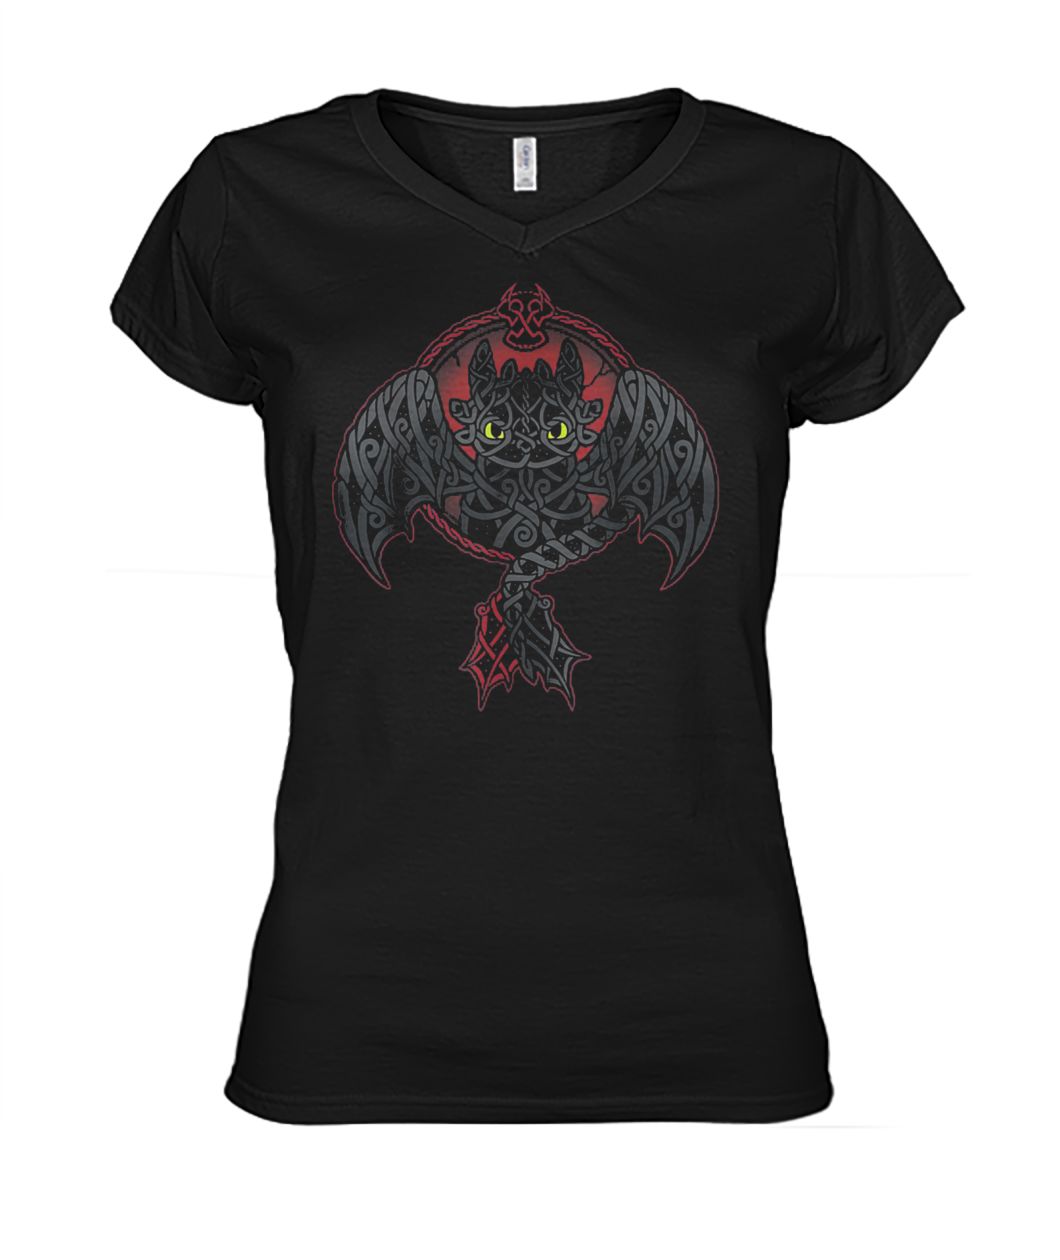 How to train your dragon viking toothless night fury women's v-neck